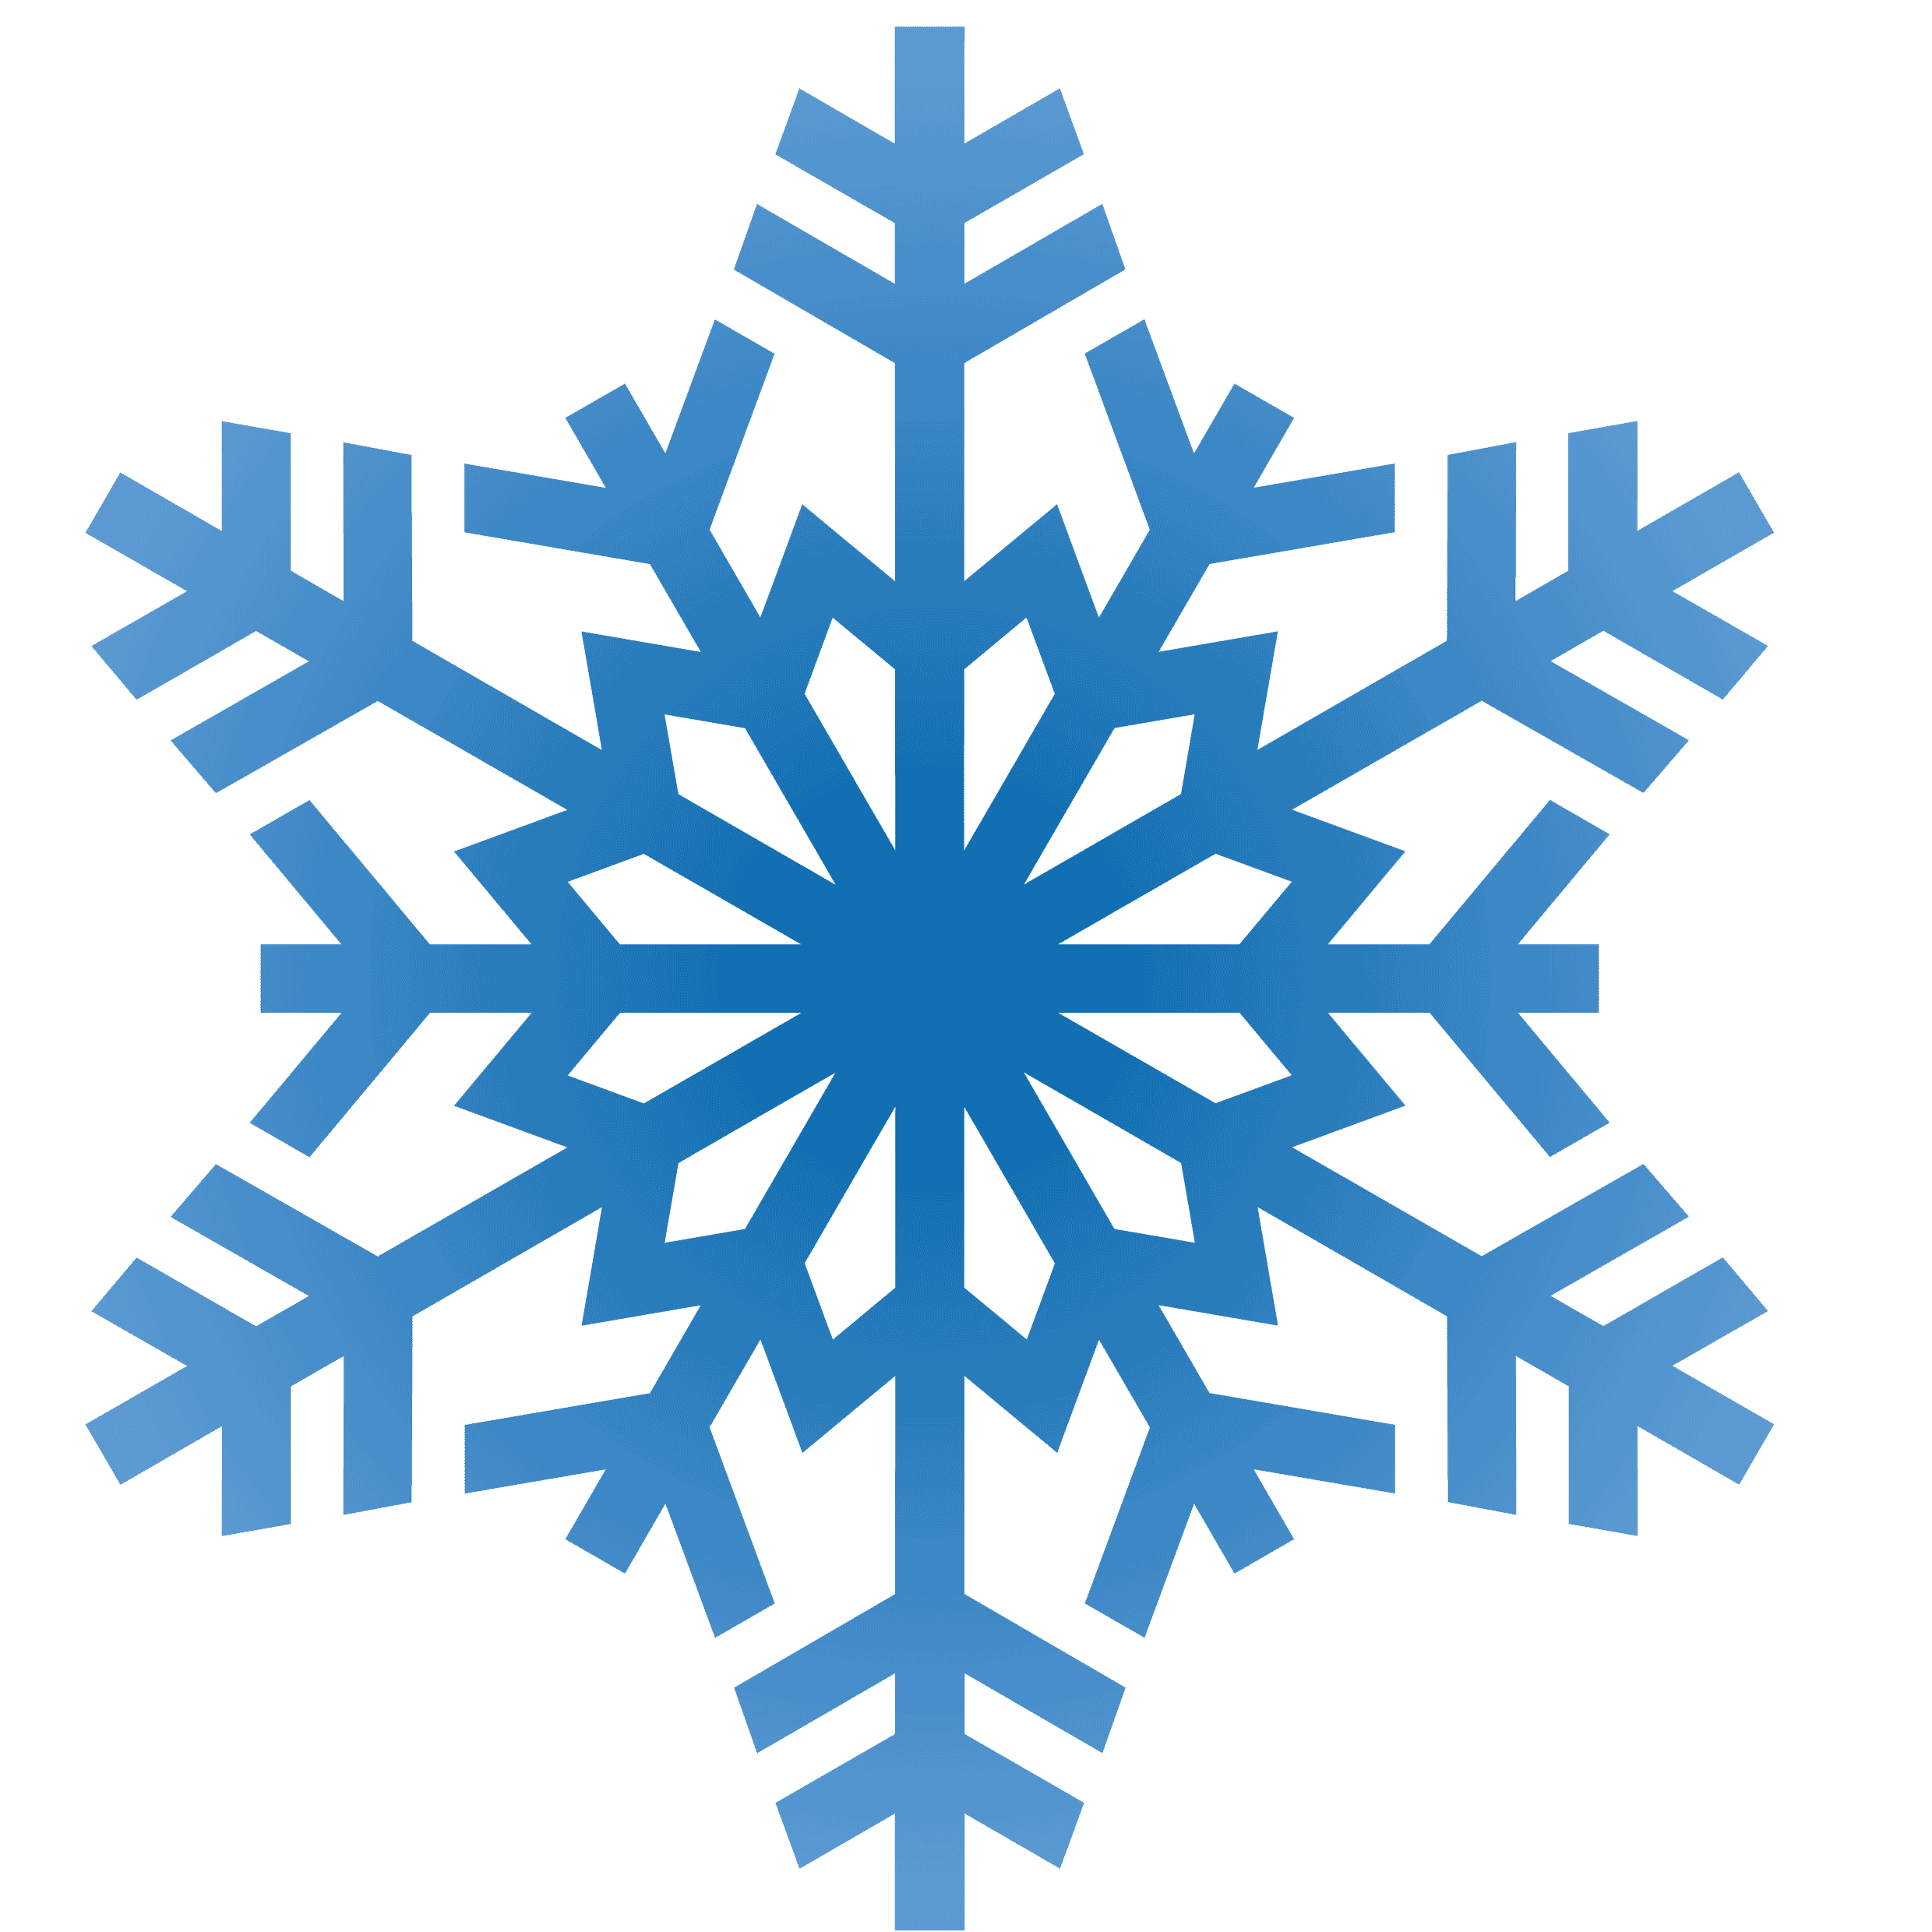 Snowflakes snowflake free scotland. Yearbook clipart transparent background